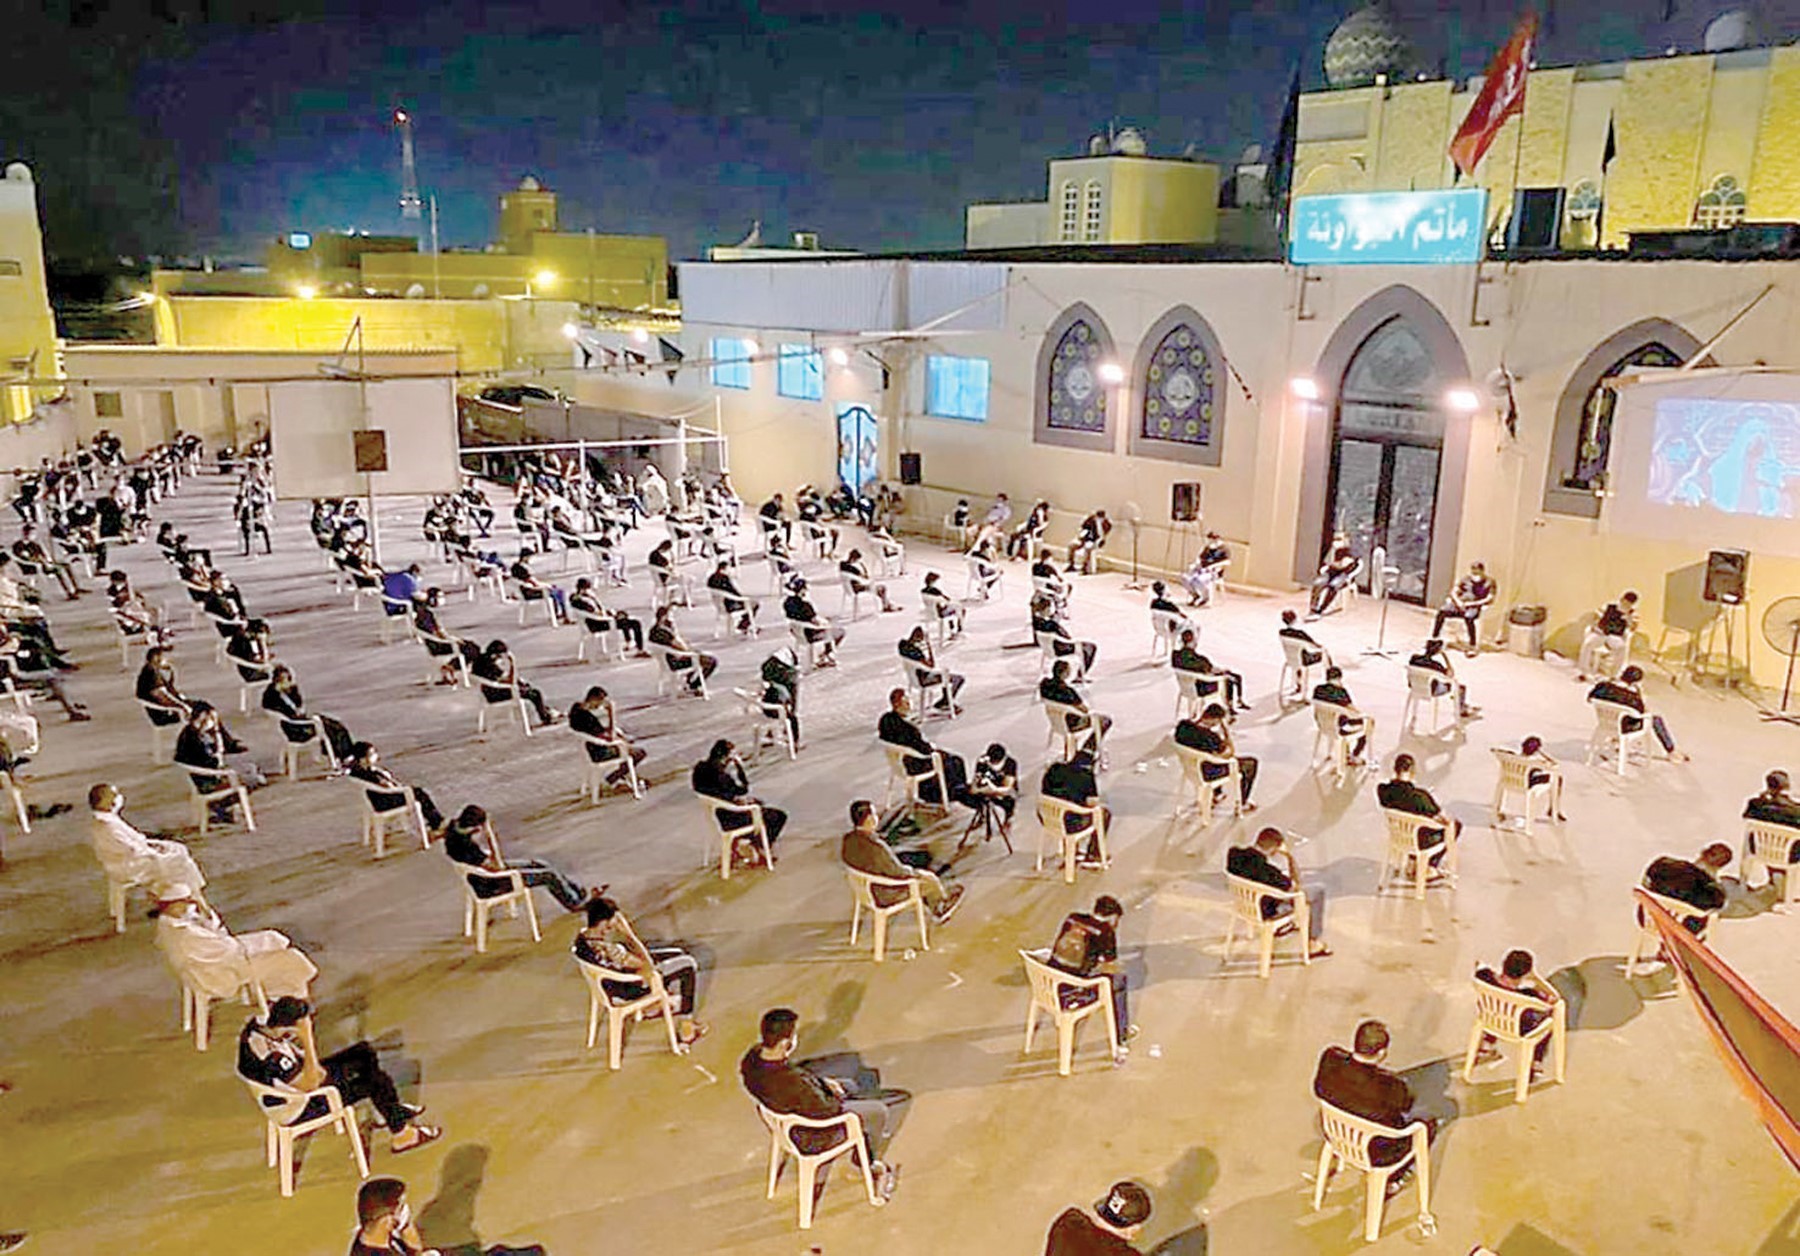 Weekly Position: We Emphasize The  Extensive Revival Of Ashura In Bahrain  And The Confrontation Of The Tyrant’s  Propaganda In Distorting The Season  And Corrupting Its Authentic Values